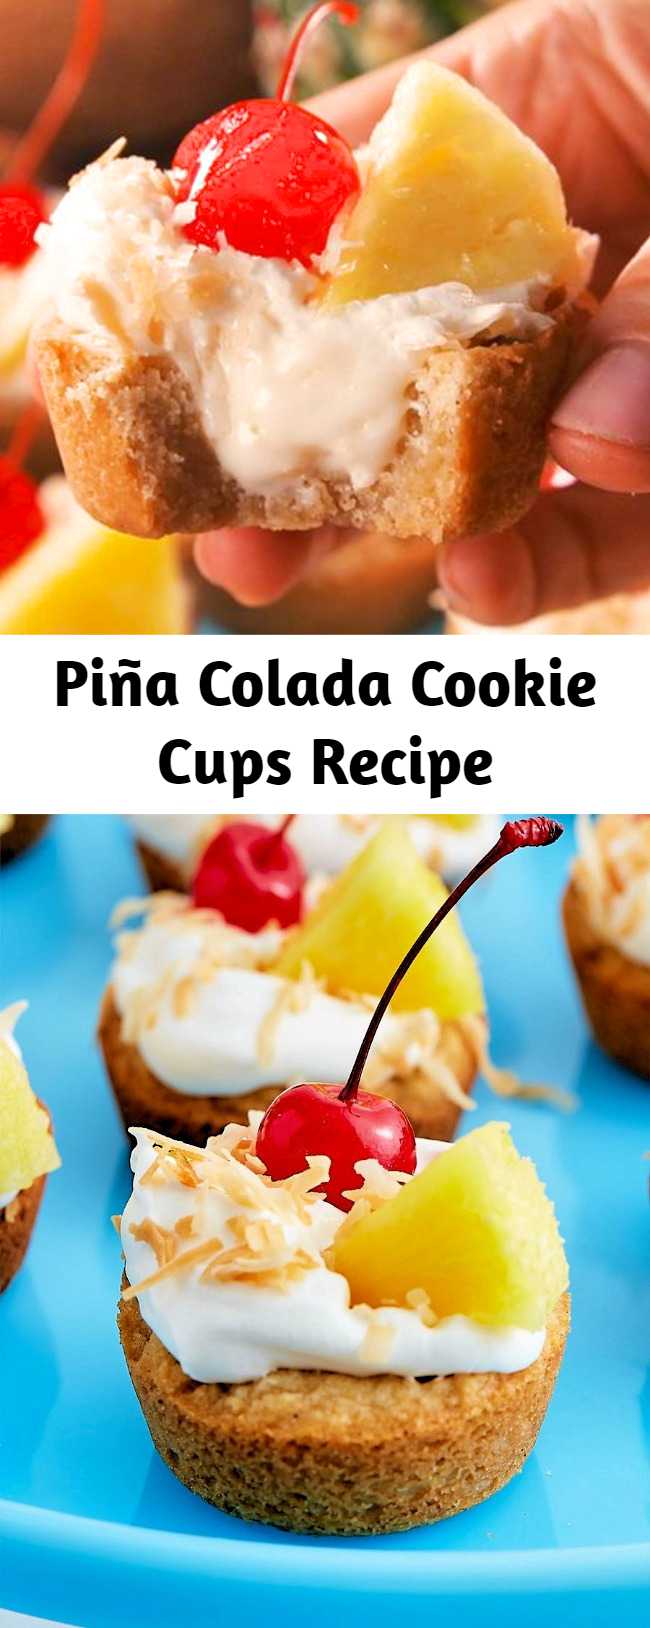 The filling tastes like a cross between a slice of cheesecake and a piña colada. If you're bringing these to a party with little ones, feel free to skip the booze.